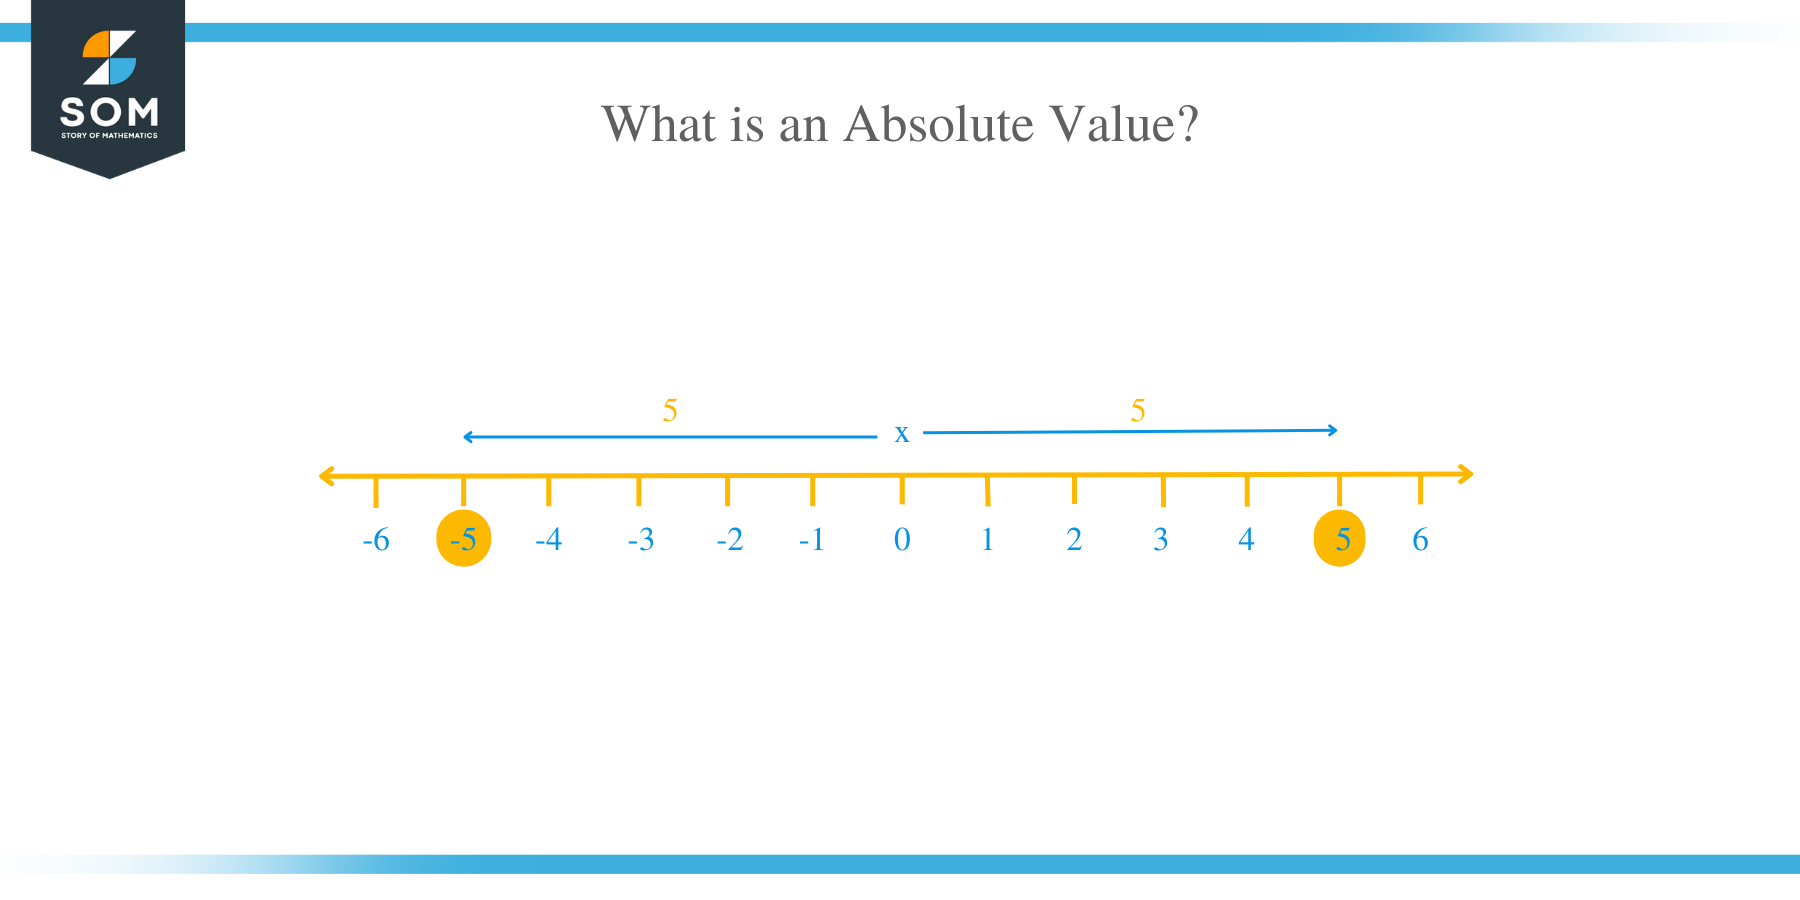 What is an Absolute Value?